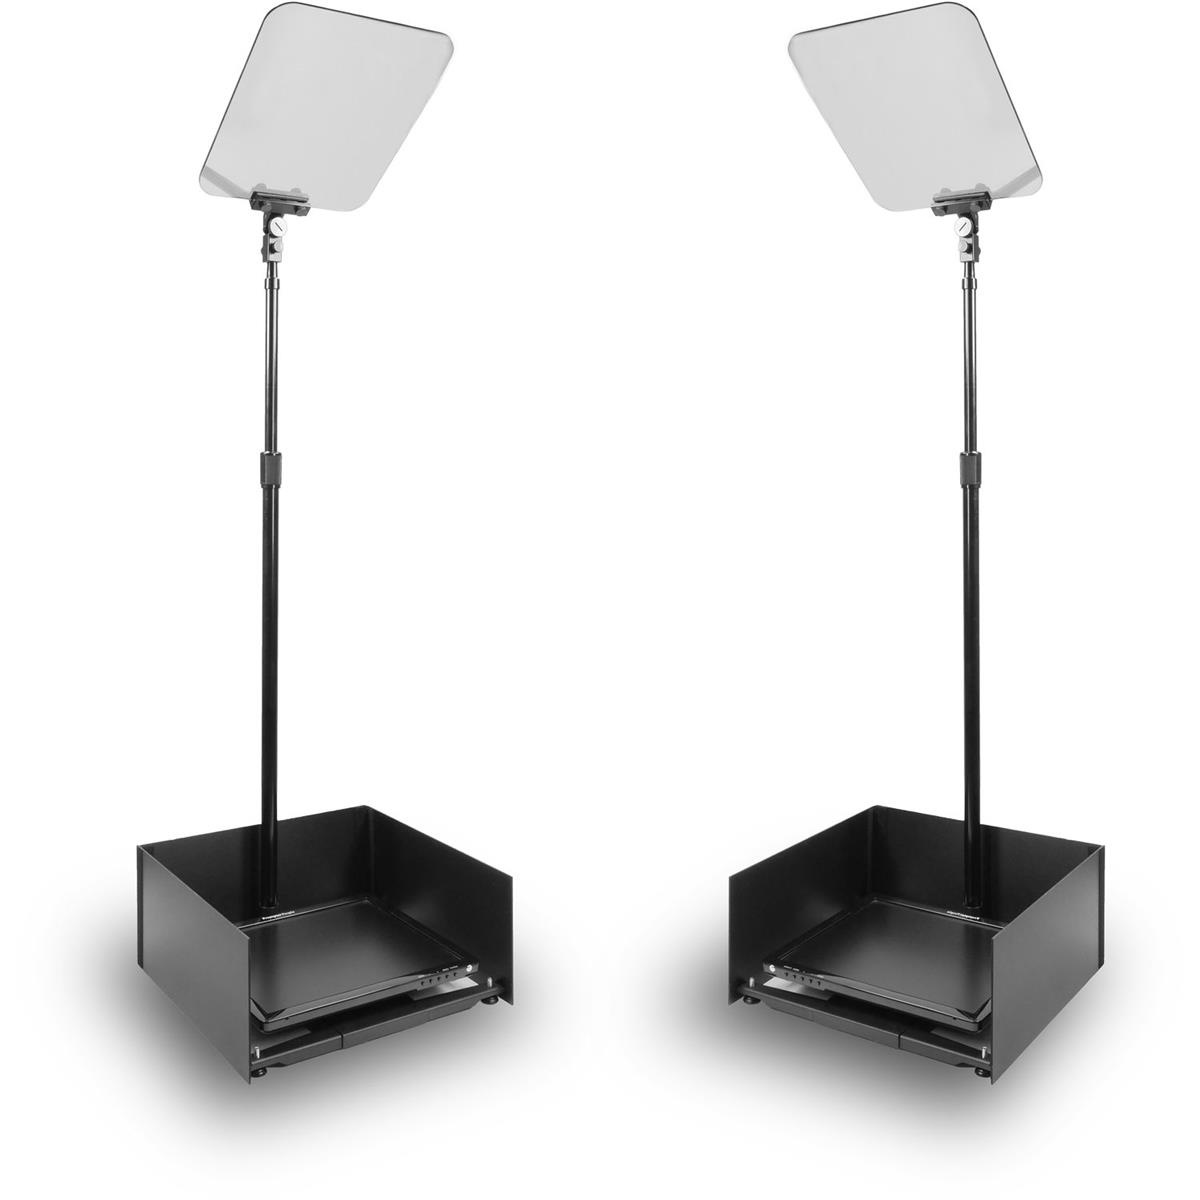 

Prompter People StagePro 17" Presidential Teleprompter, 400 Nit Brightness, Pair